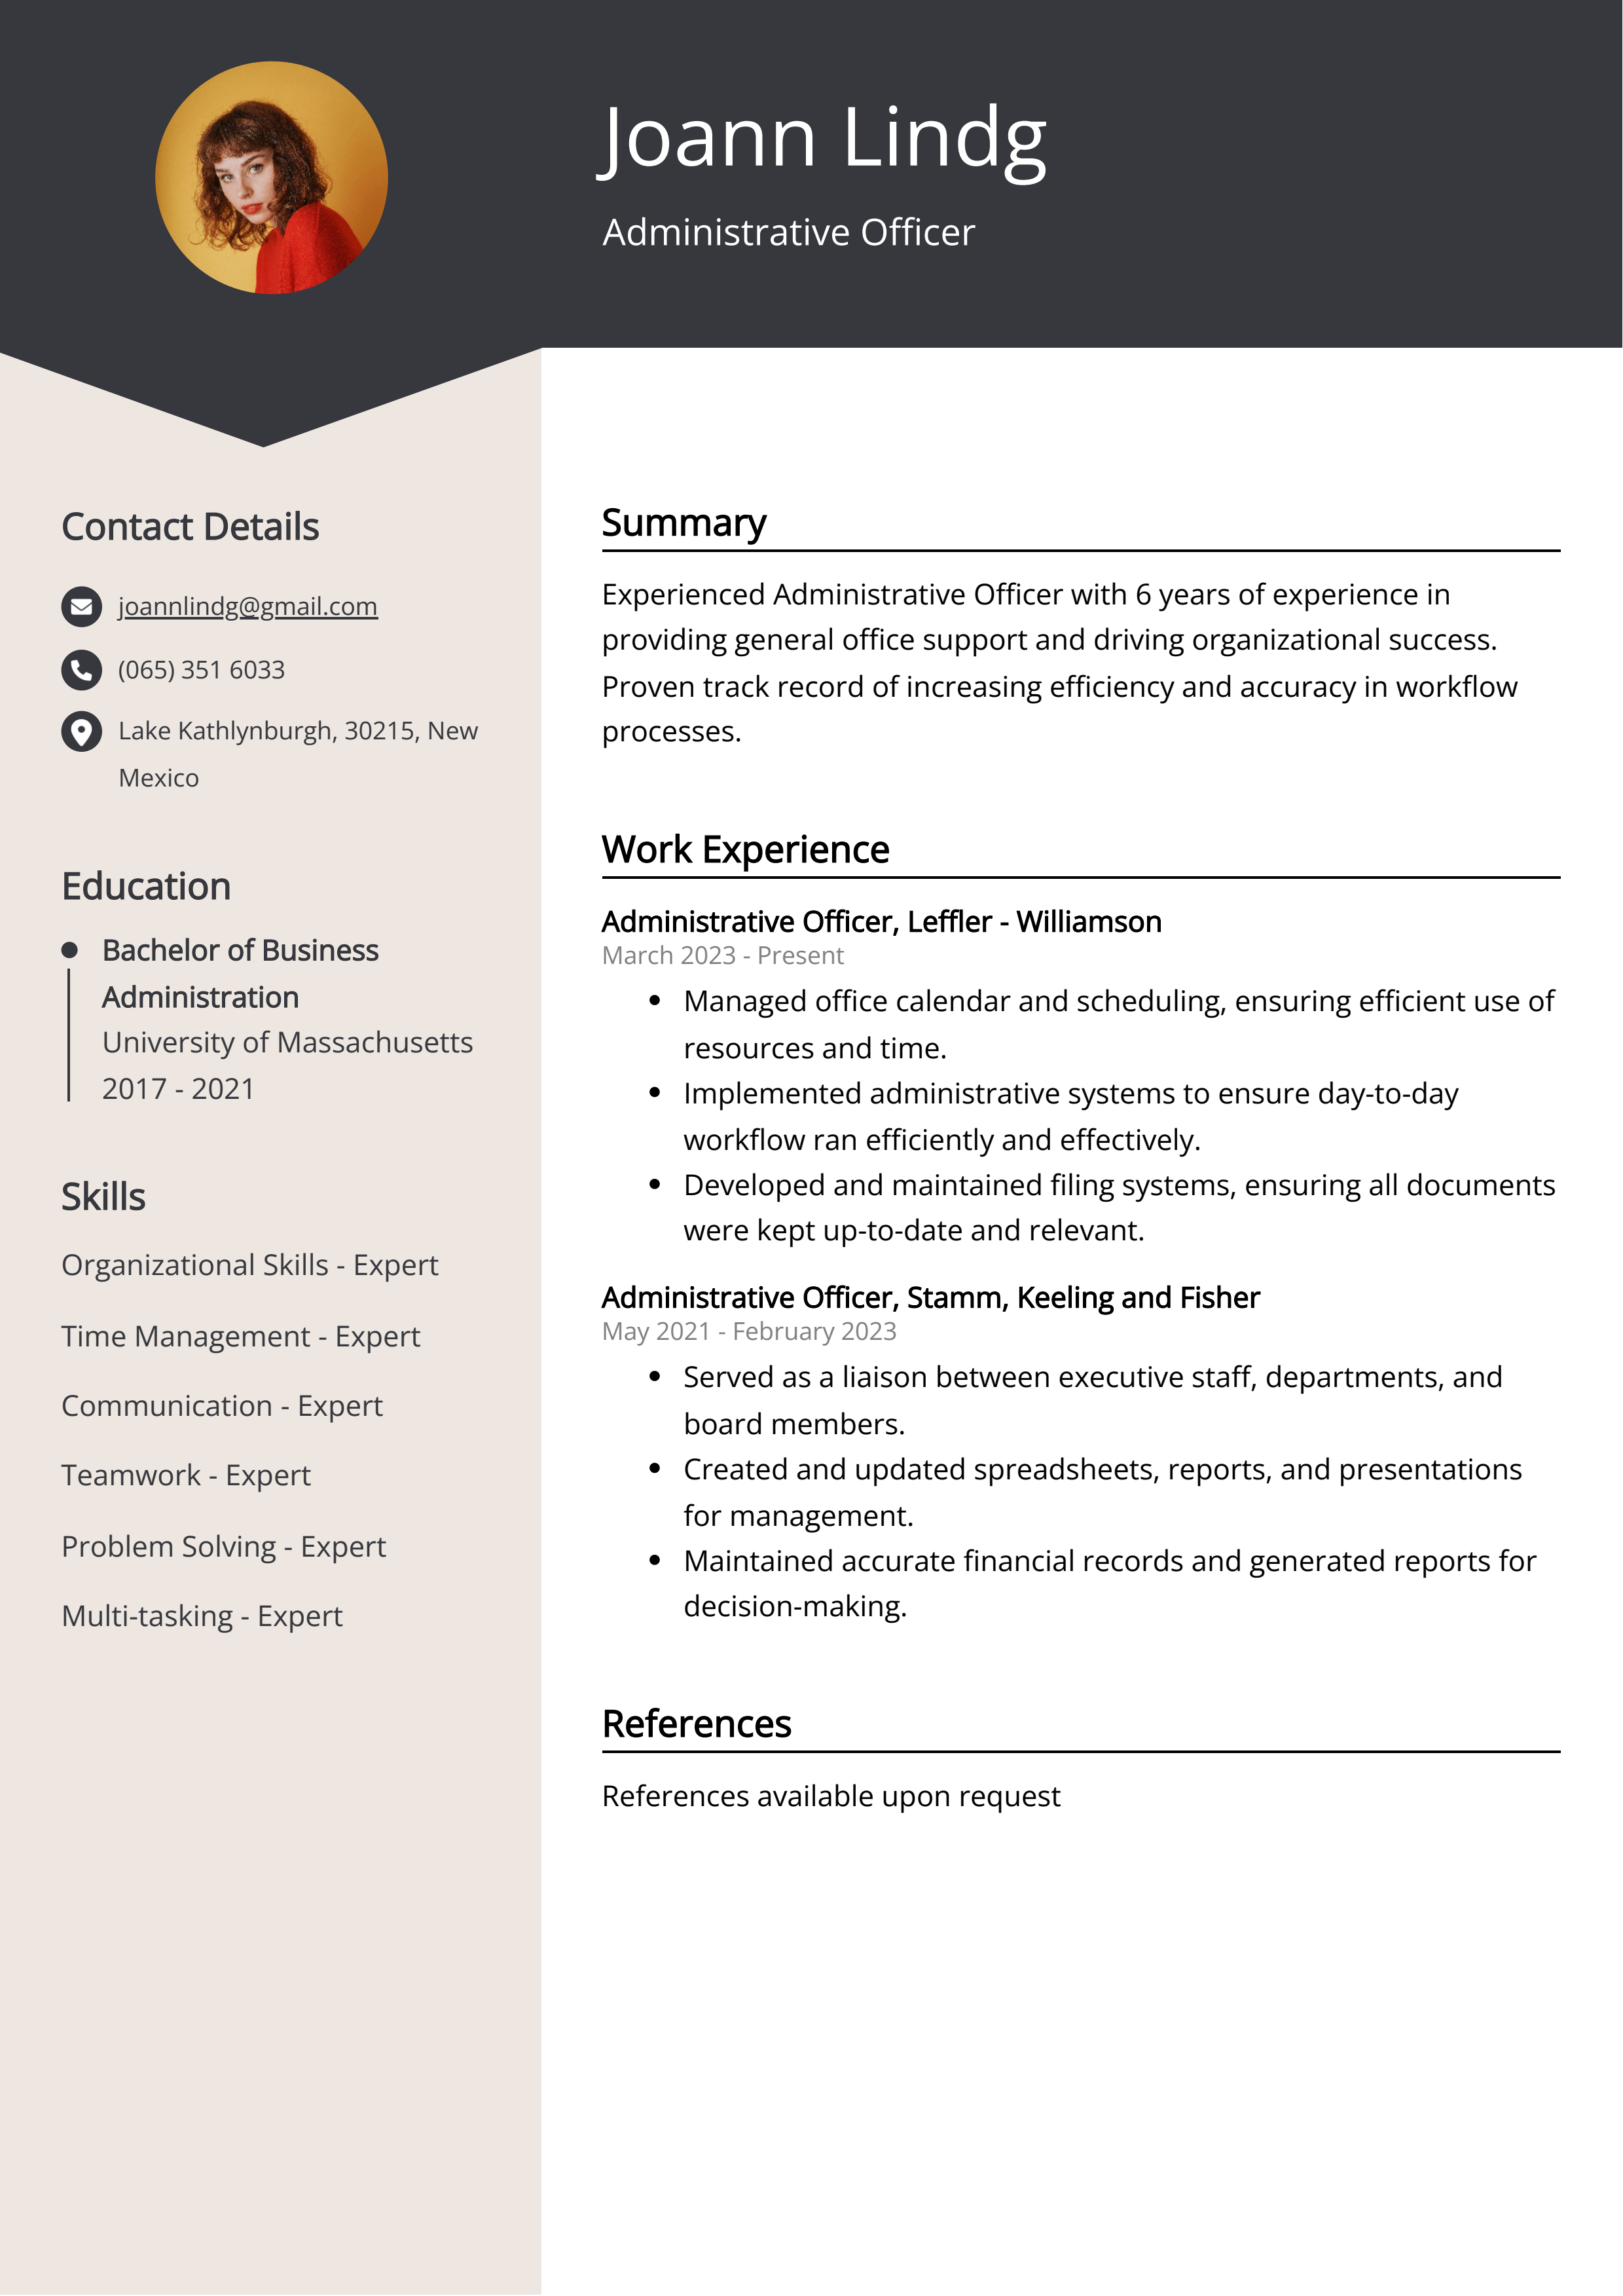 Administrative Officer CV Example